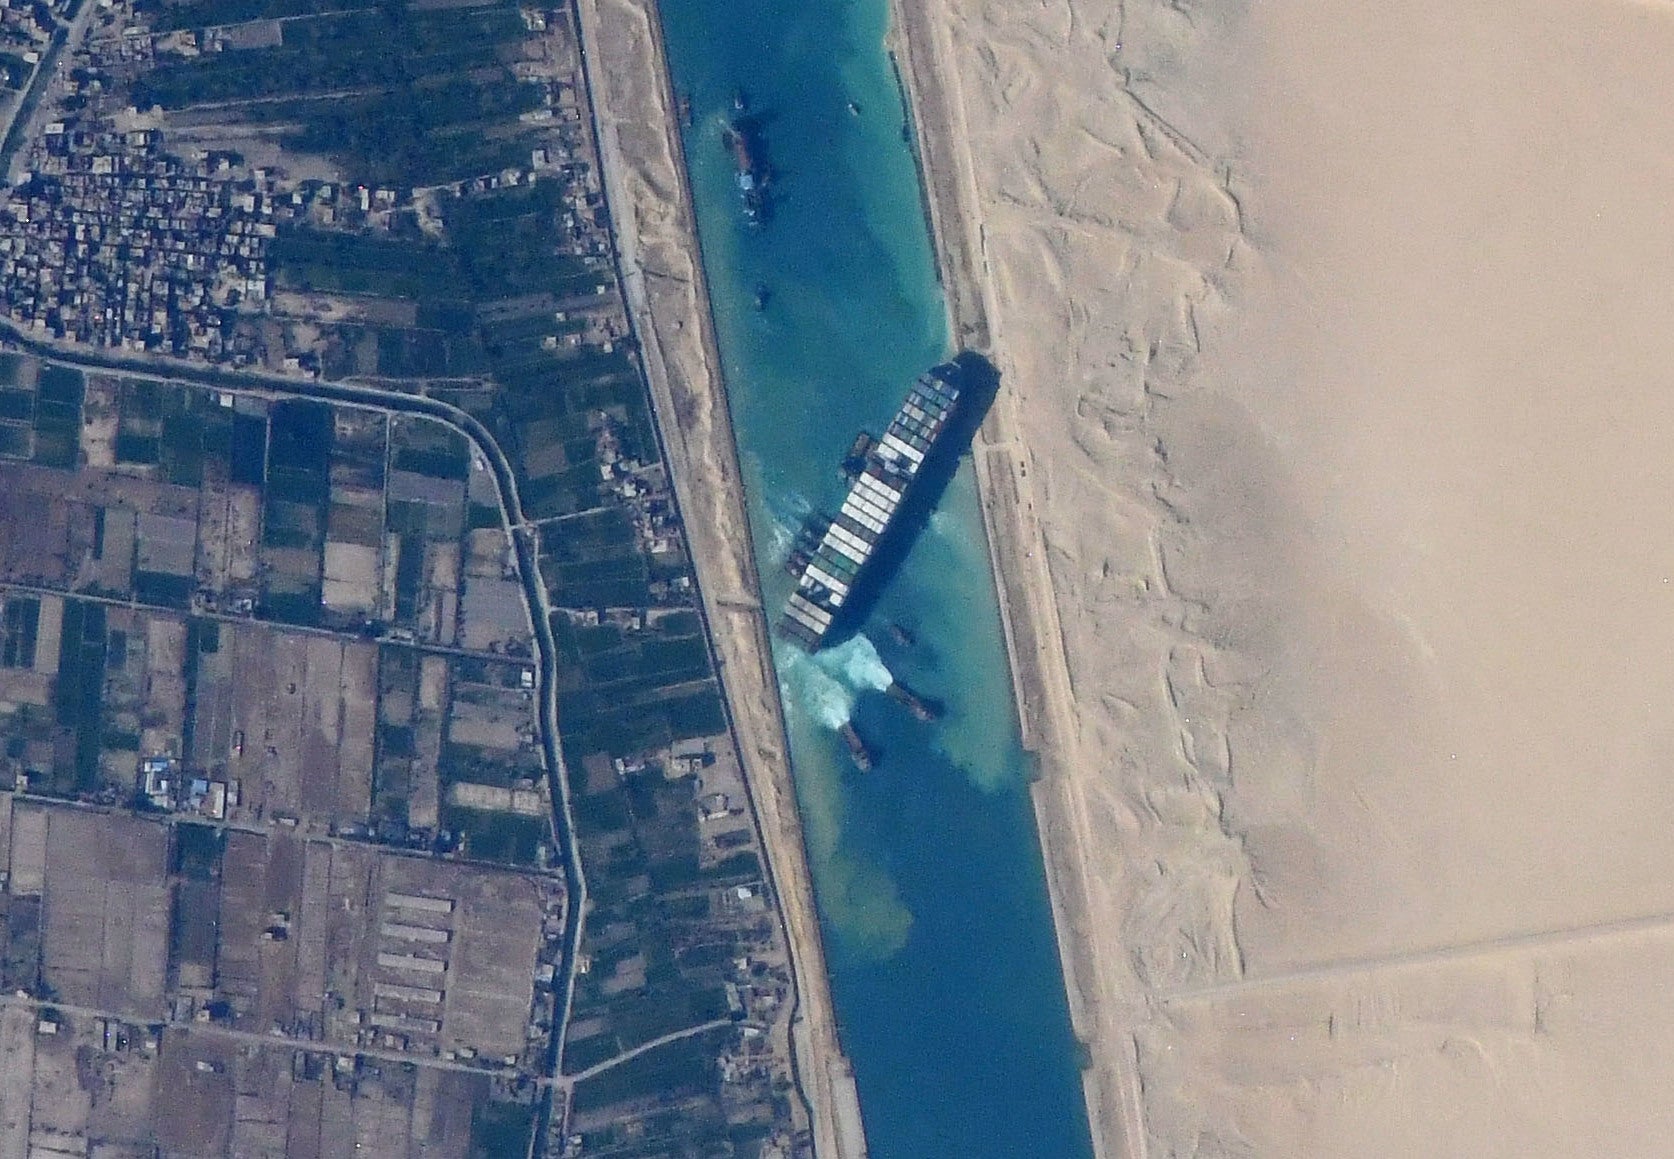 message-editor%2F1635897304654-ever_given_in_suez_canal_viewed_from_iss.jpeg